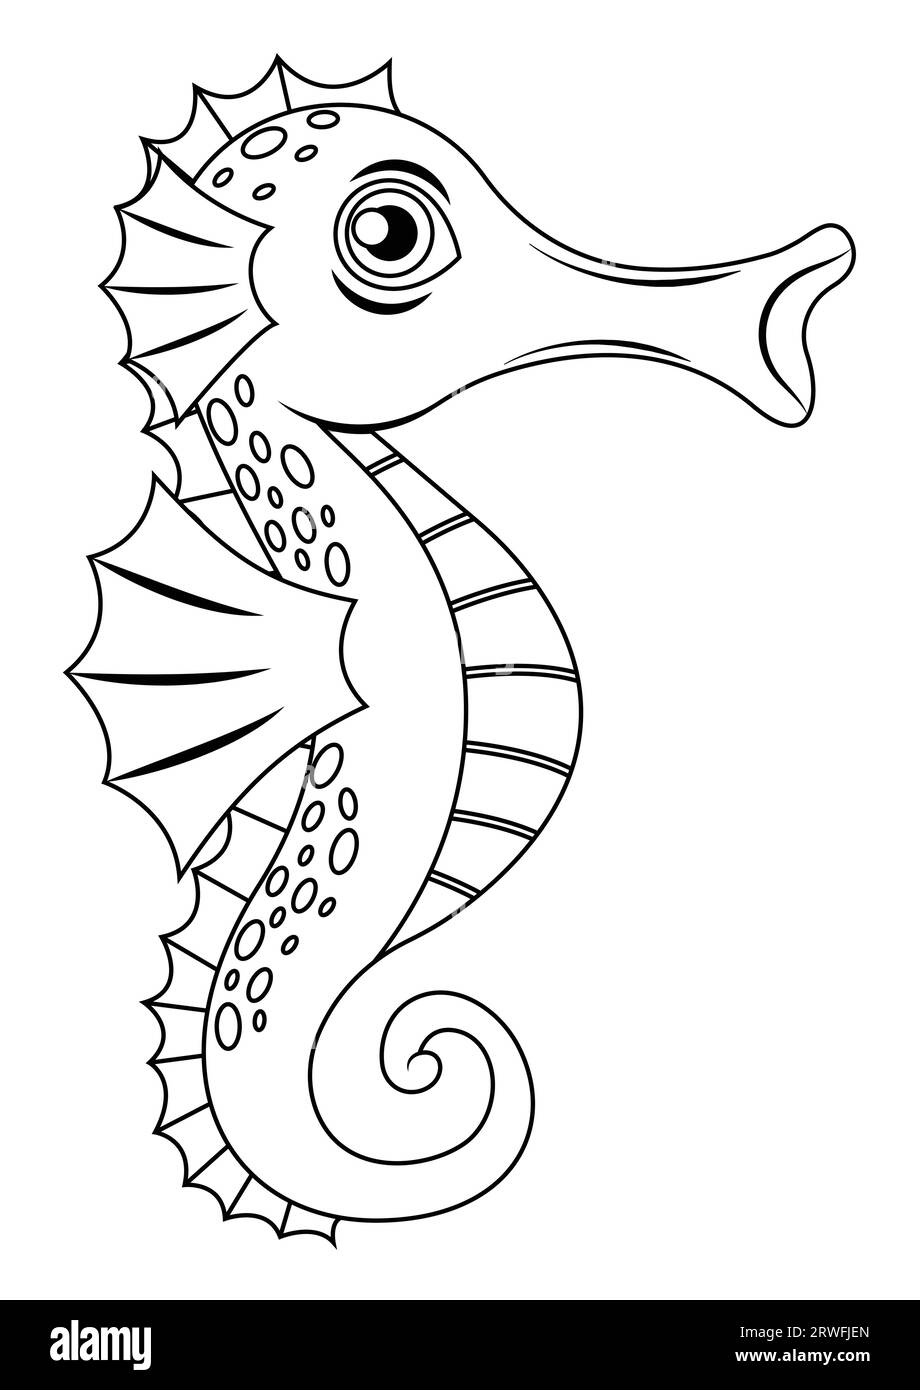 Black and white seahorse cartoon character vector. Coloring page of cartoon seahorse Stock Vector